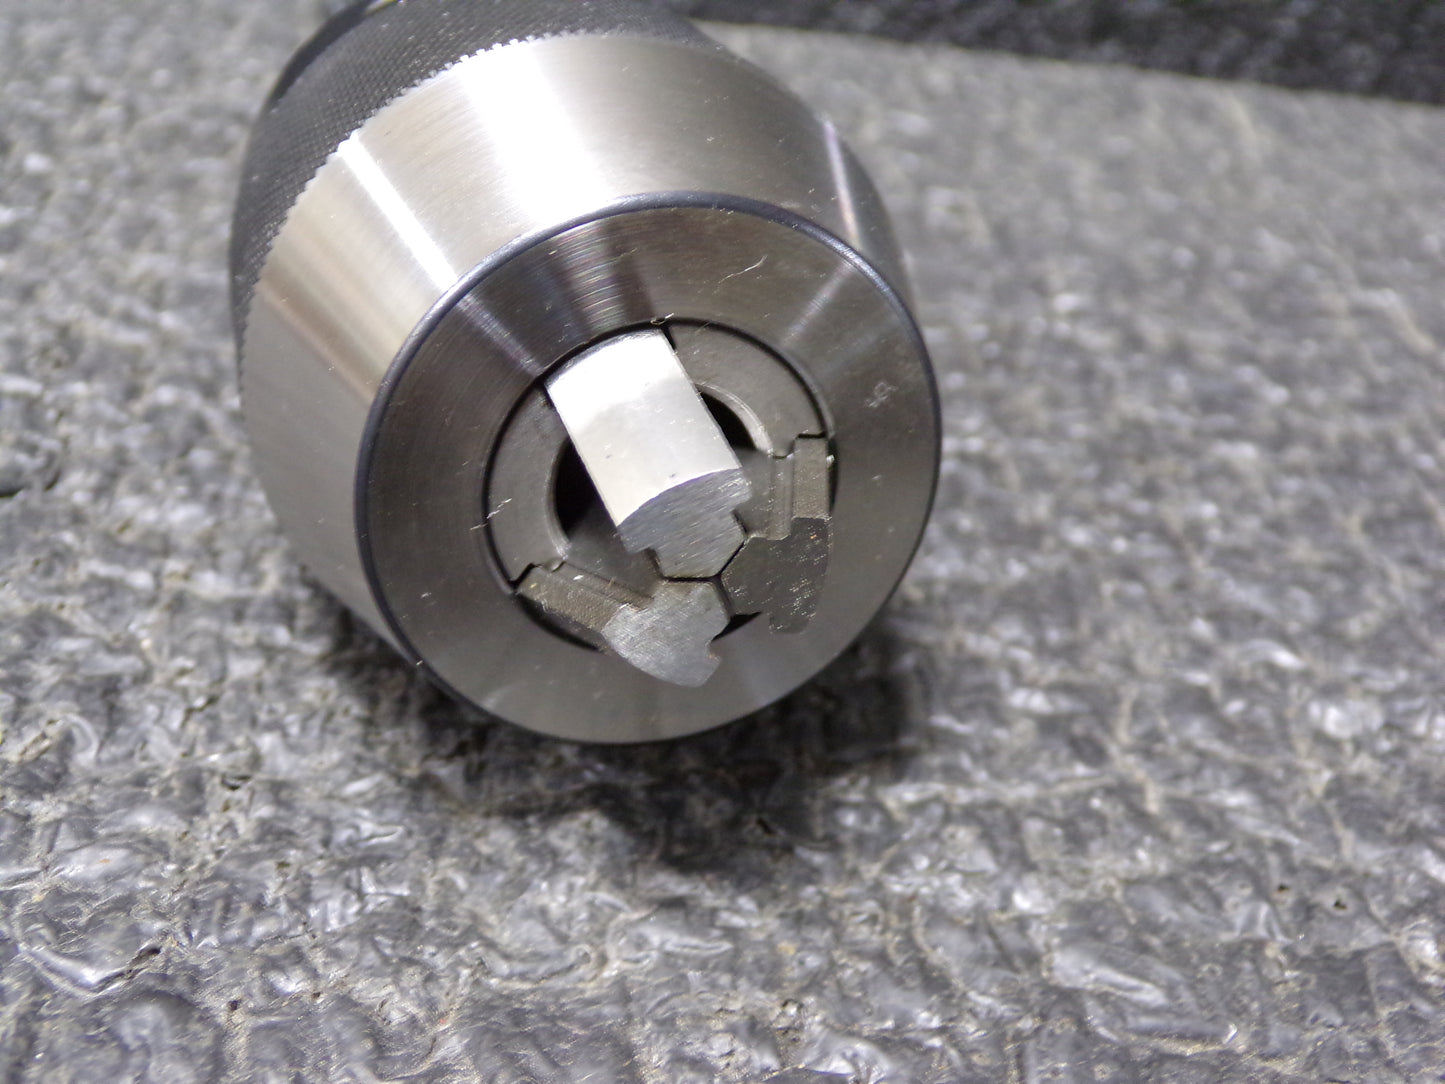 JACOBS Drill Chuck, For CNC Machines, Morse Taper, Mounting Size MT3, Max. Drill Capacity 0.5120 in (CR00267-BT02)